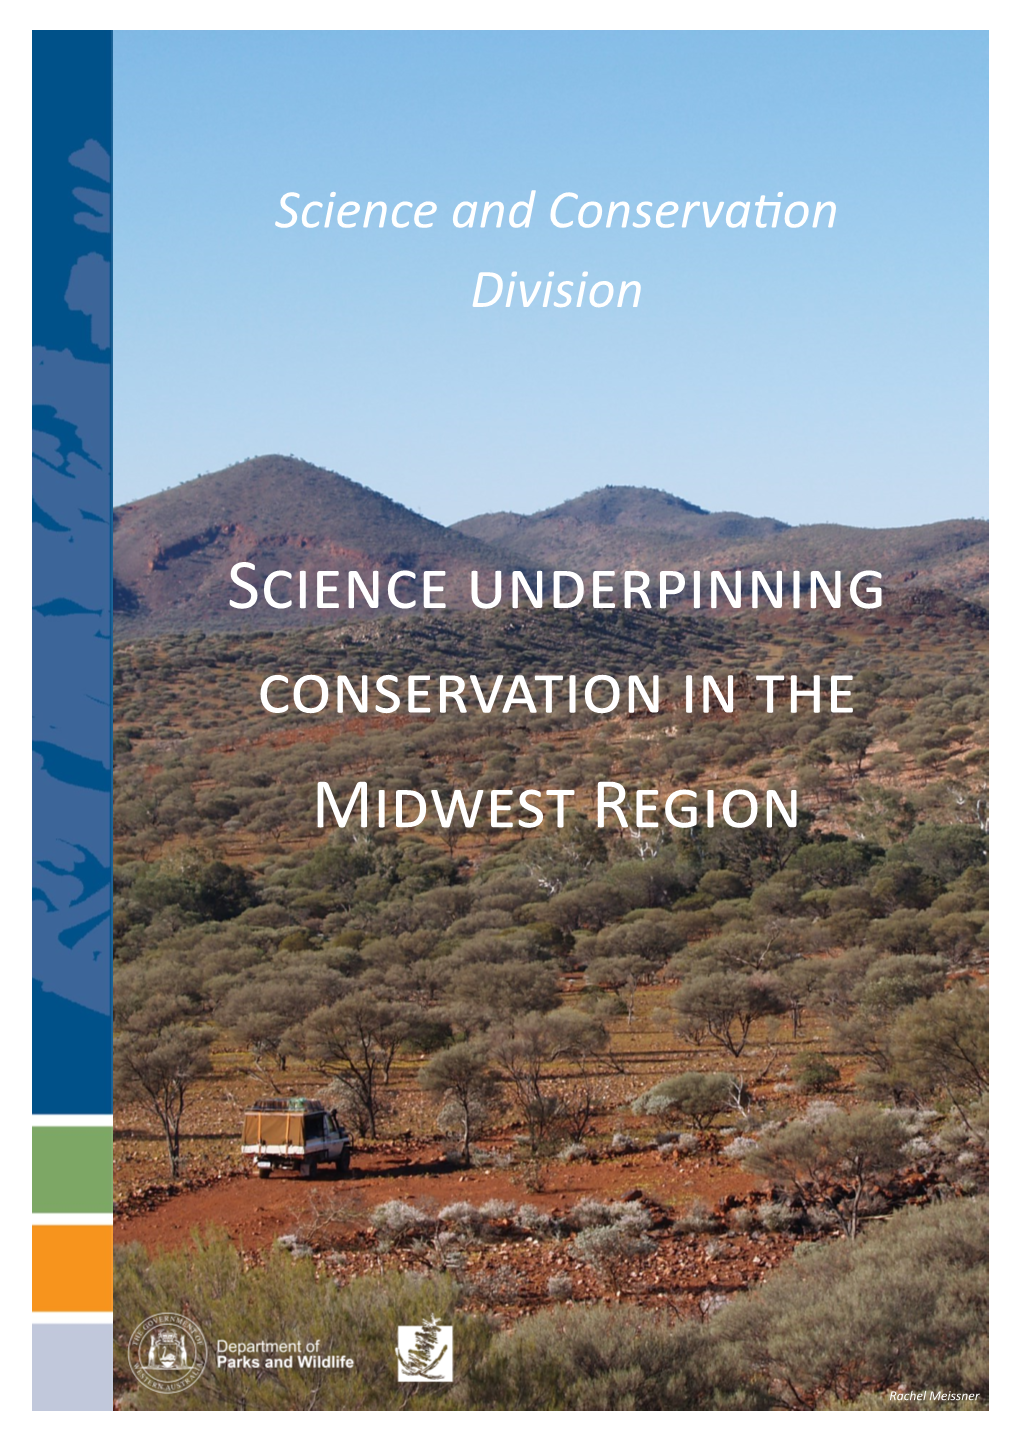 Science Underpinning Conservation in the Midwest Region